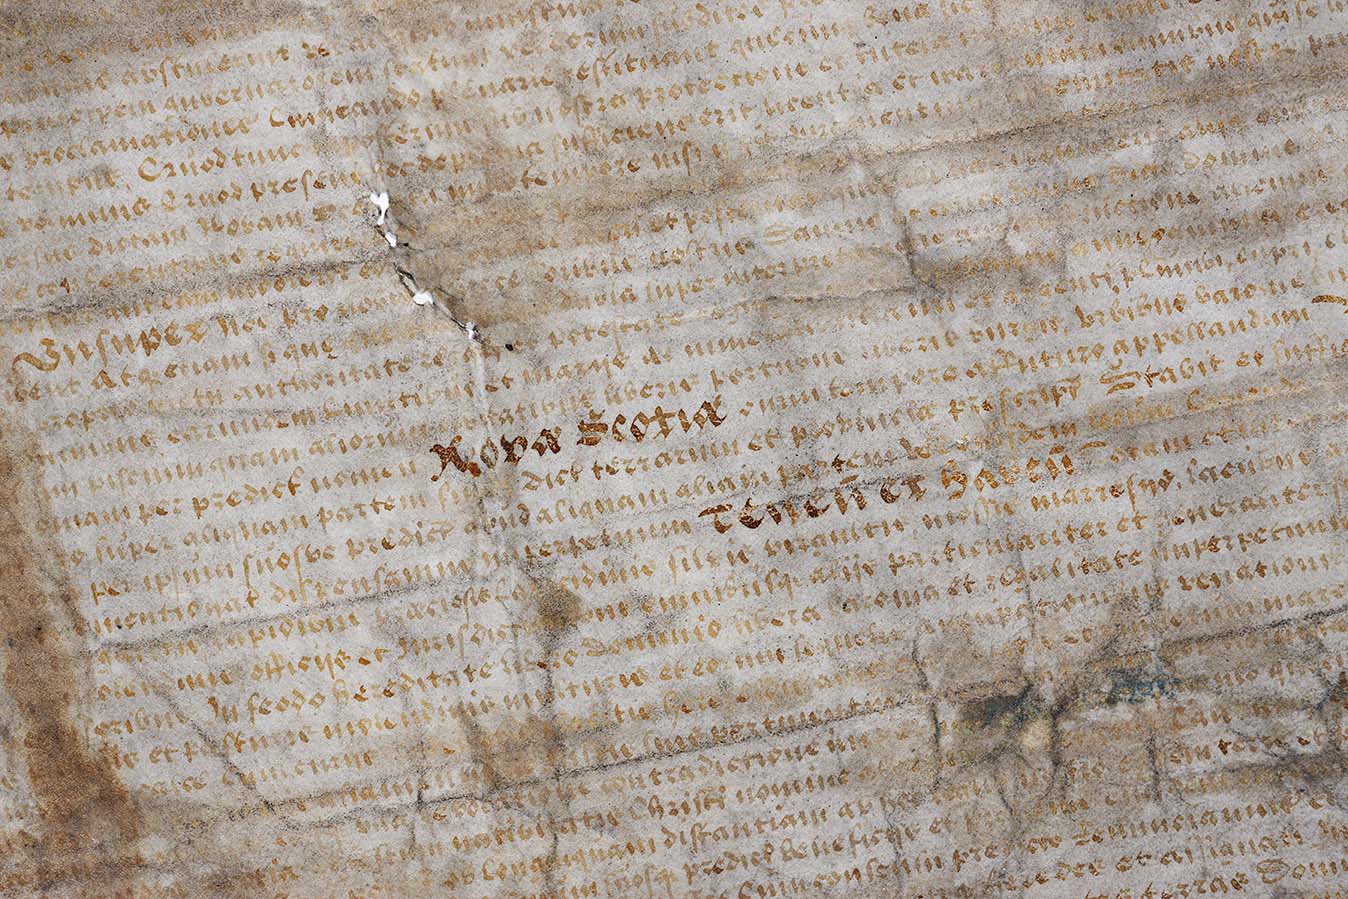 Close-up of 1621 Charter showing Nova Scotia written for the first time